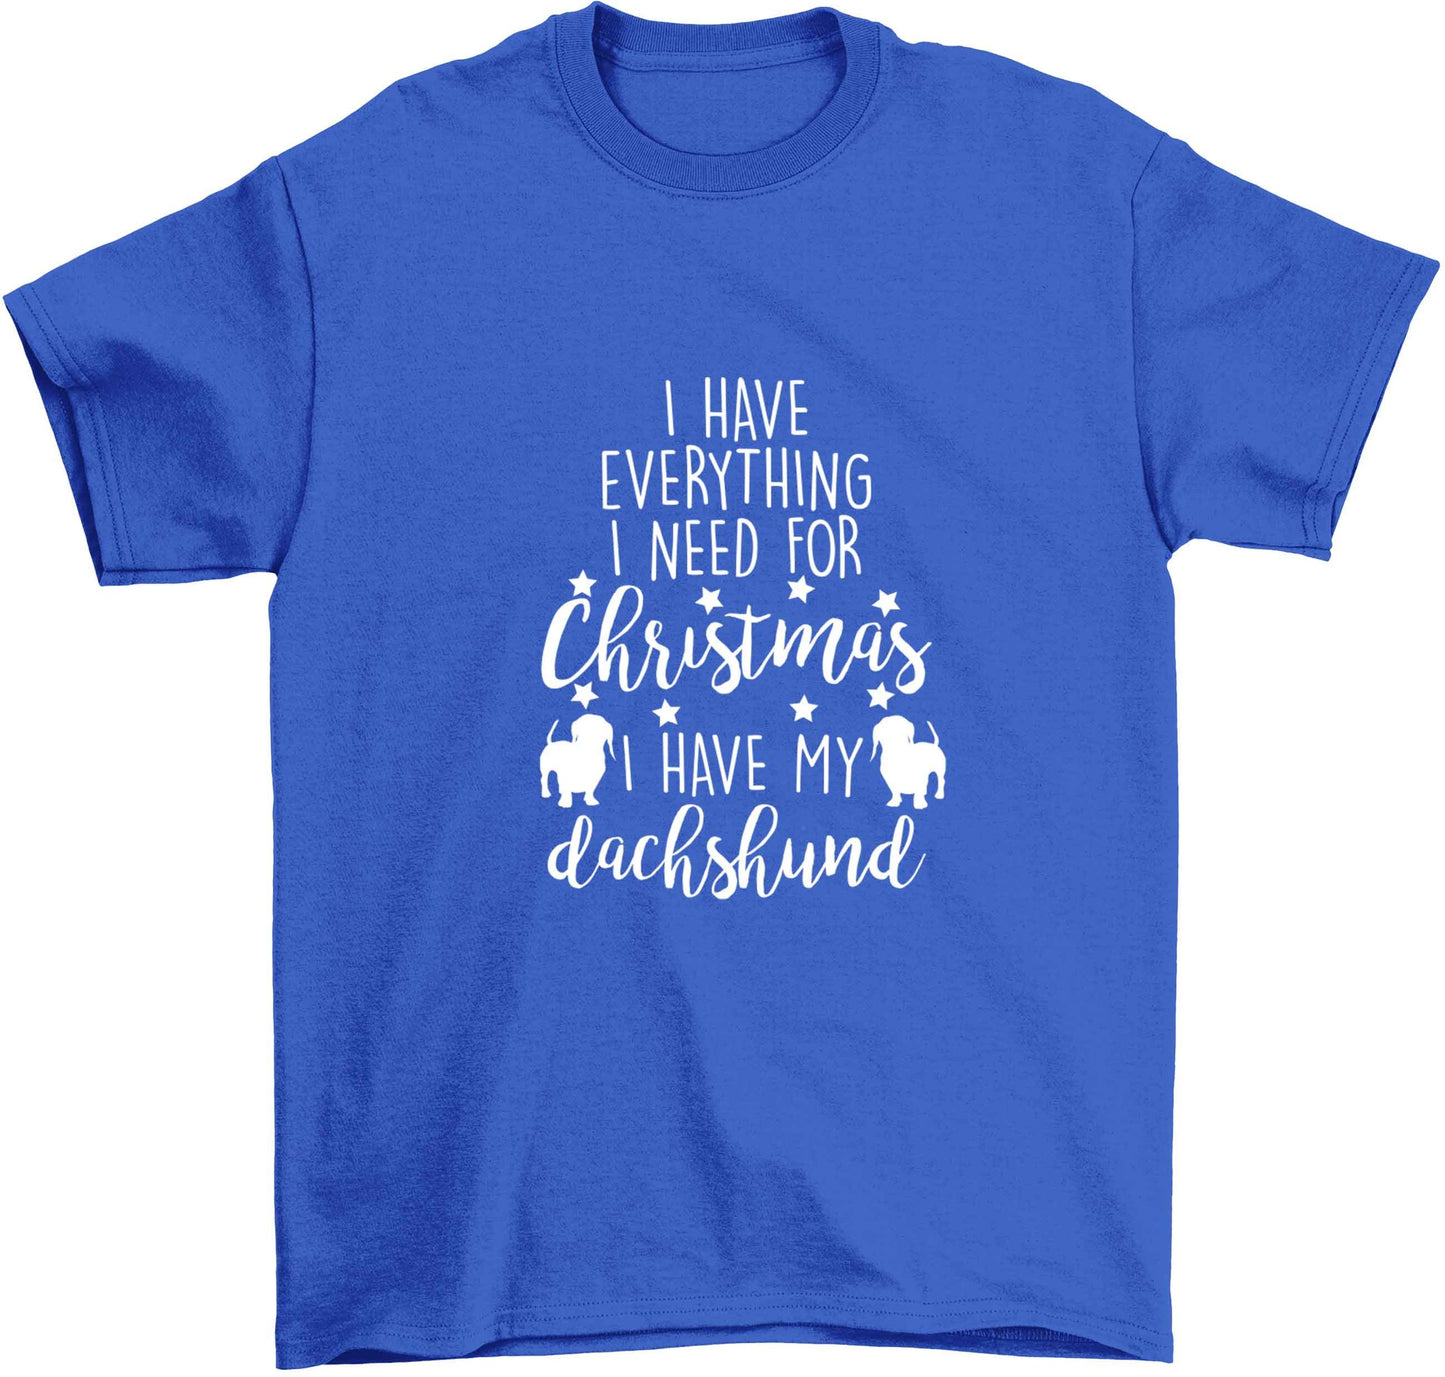 I have everything I need for Christmas I have my dachshund Children's blue Tshirt 12-13 Years